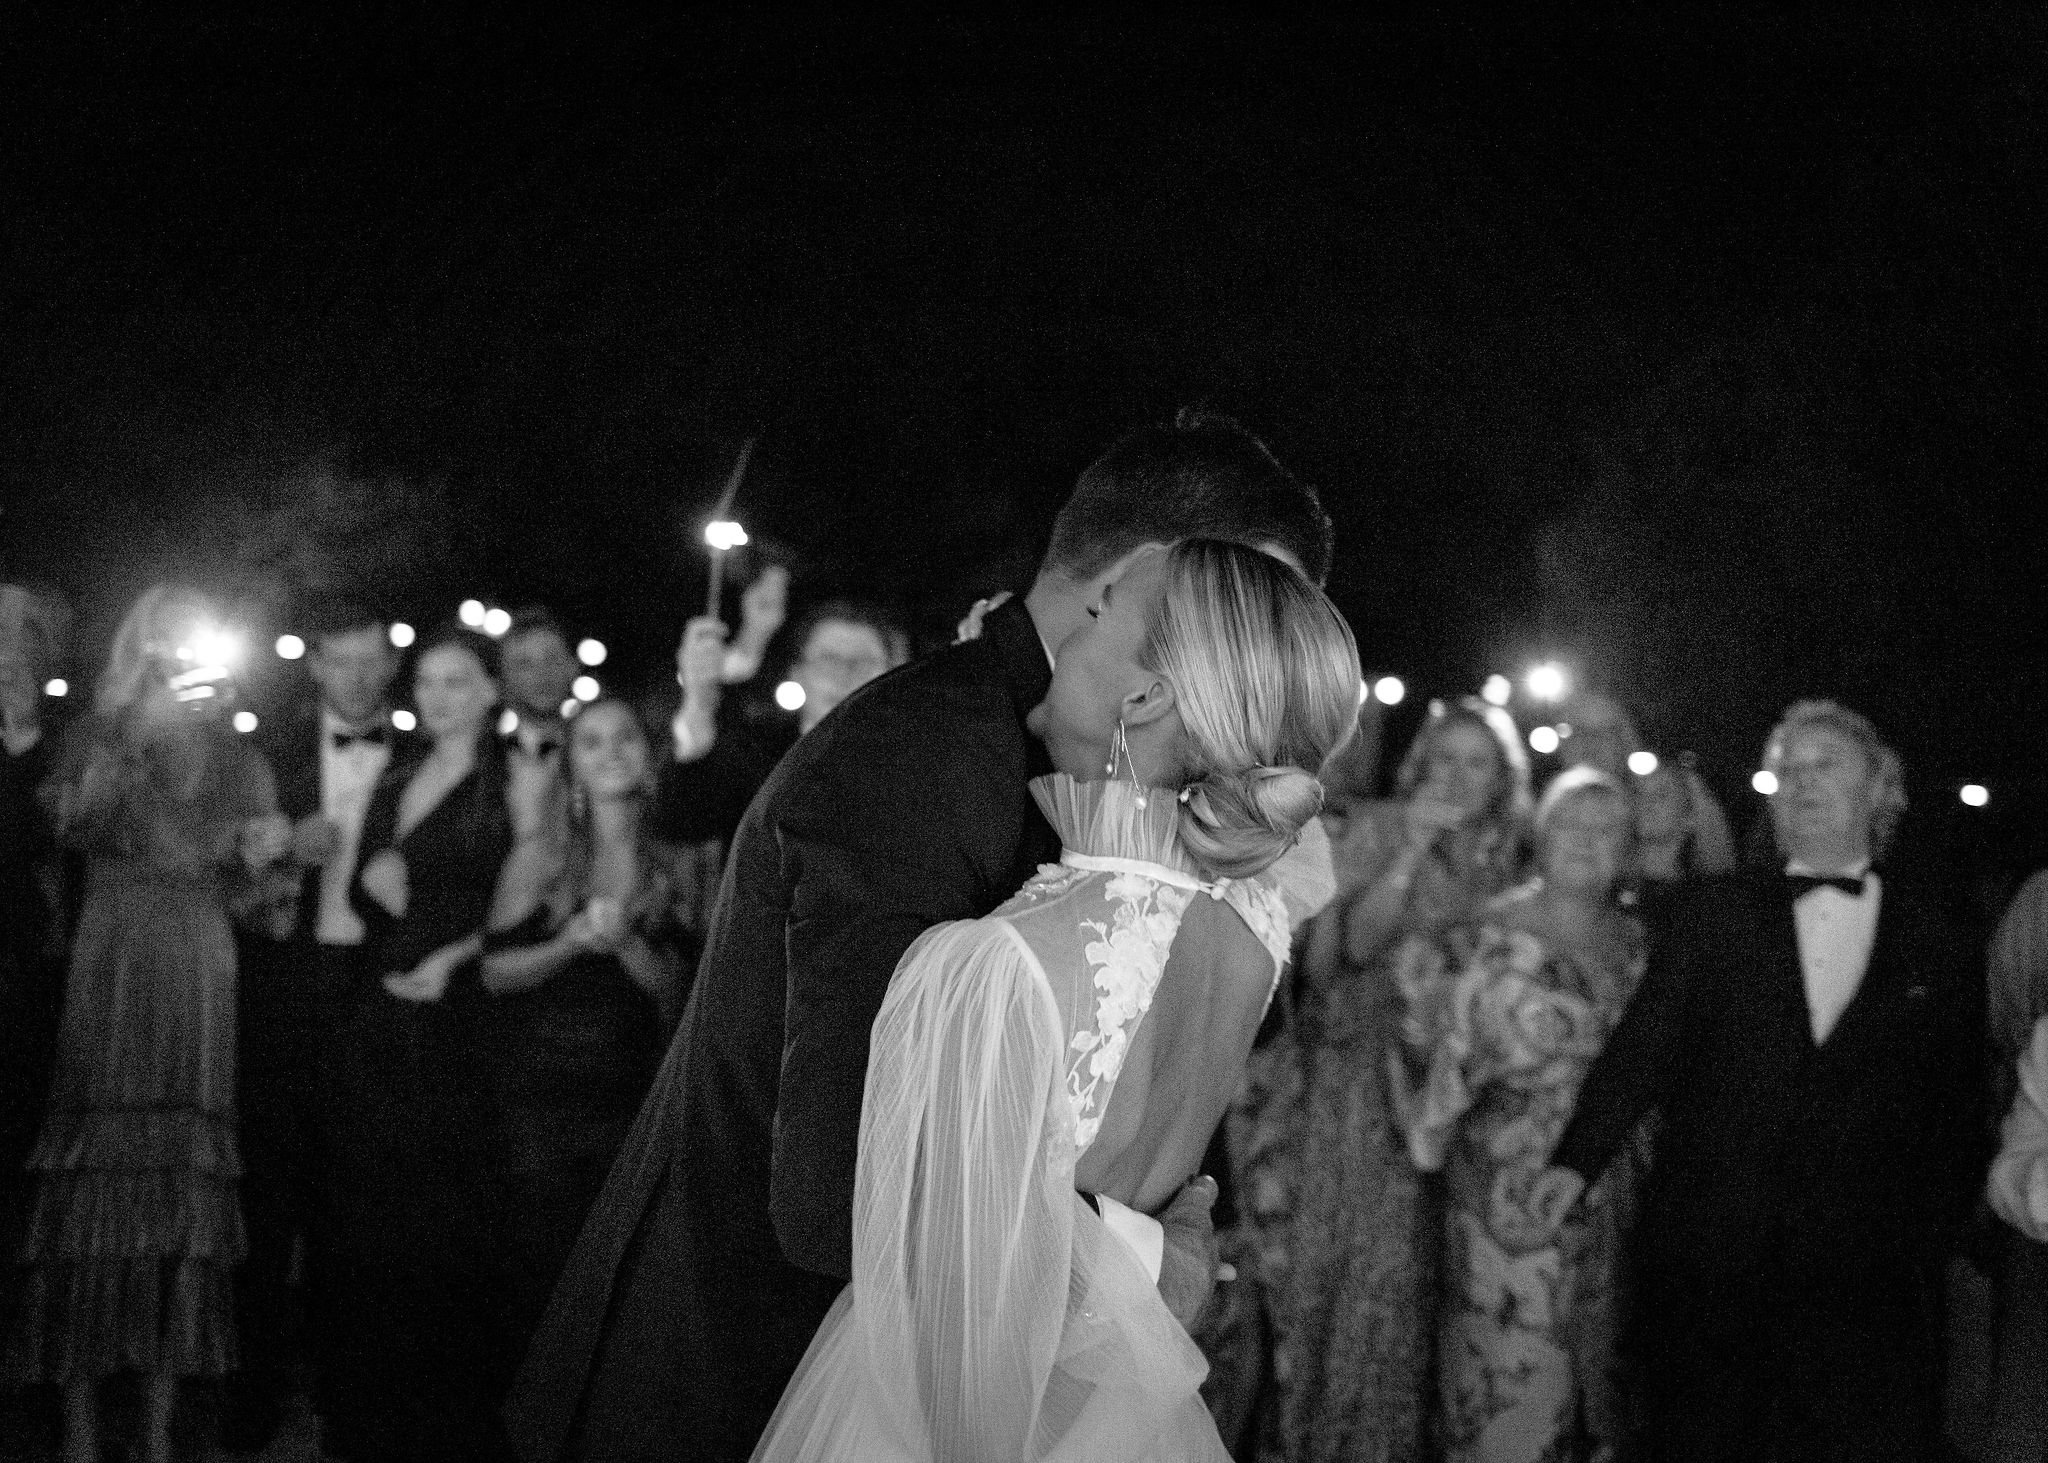 outside-first-wedding-dance-by-Lucy-Till-French-Weddings-luxurious-wedding-planner-in-provence-french-riviera-cote-d-azur-south-of-france-kitty-jack-wedding-chateau-d-estoublon-maya-marechal-photography(13of68).jpg